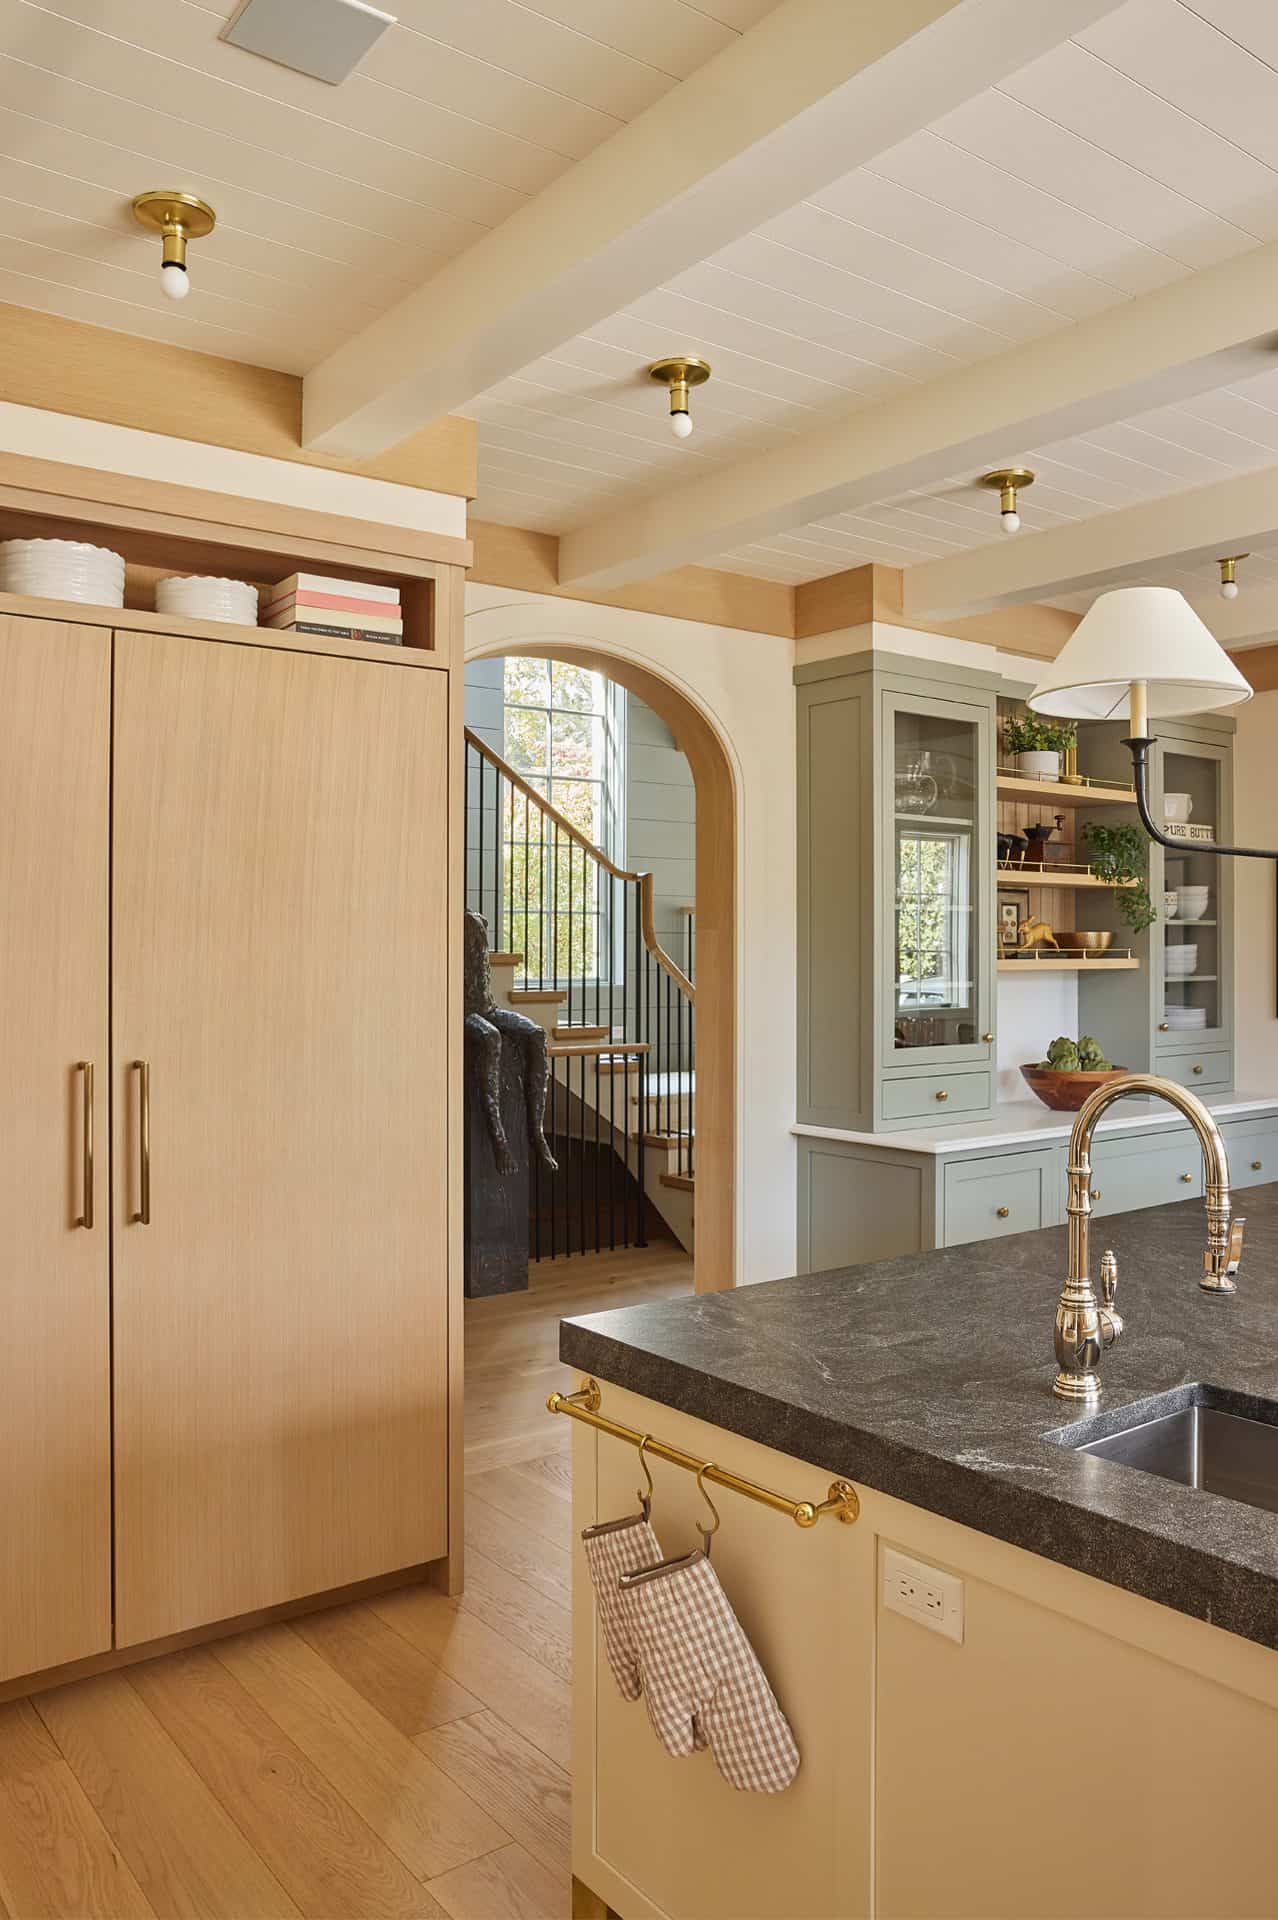 View of corner of island with prep sink, oak paneled refrigerator doors on the left, arch way in the middle, and custom hutch on the right